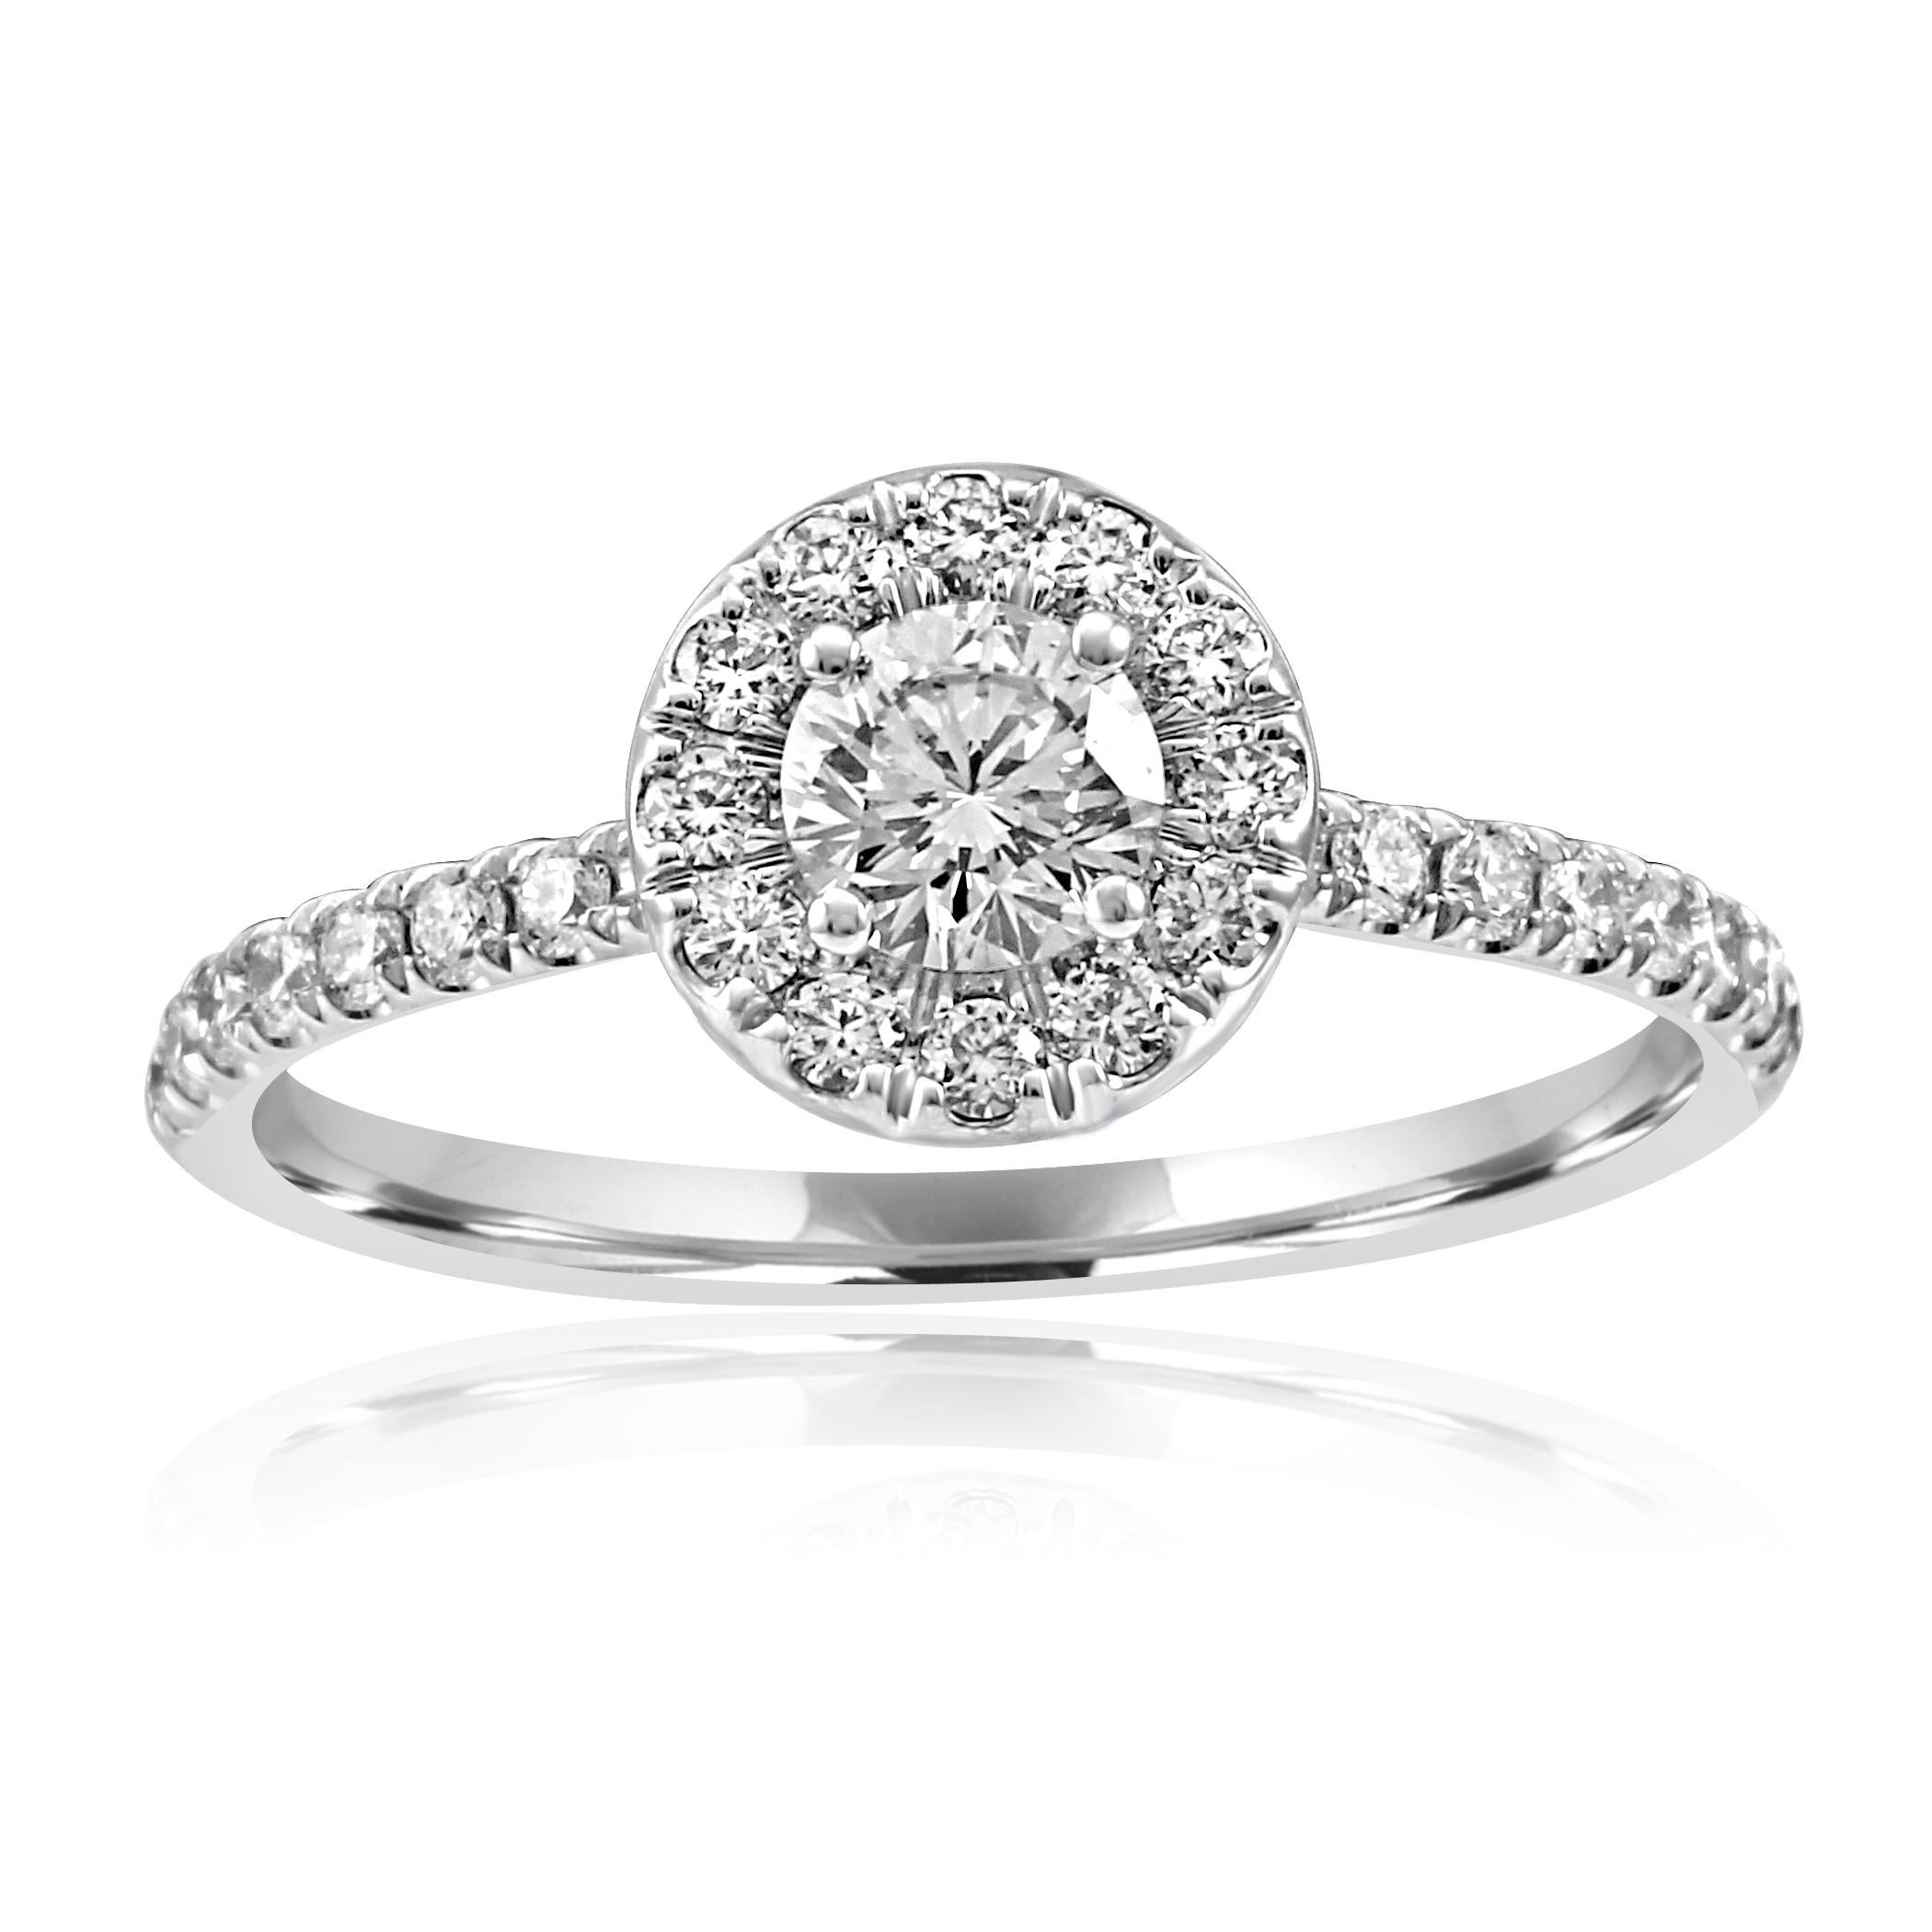 Gorgeous White Colorless diamond Round SI clarity 0.39 Carat encircled in Halo of White Round Diamonds 0.37 Carat in Stunning 14K White Gold Classic Engagement Bridal Ring.

Style available in different price ranges. Prices are based on your